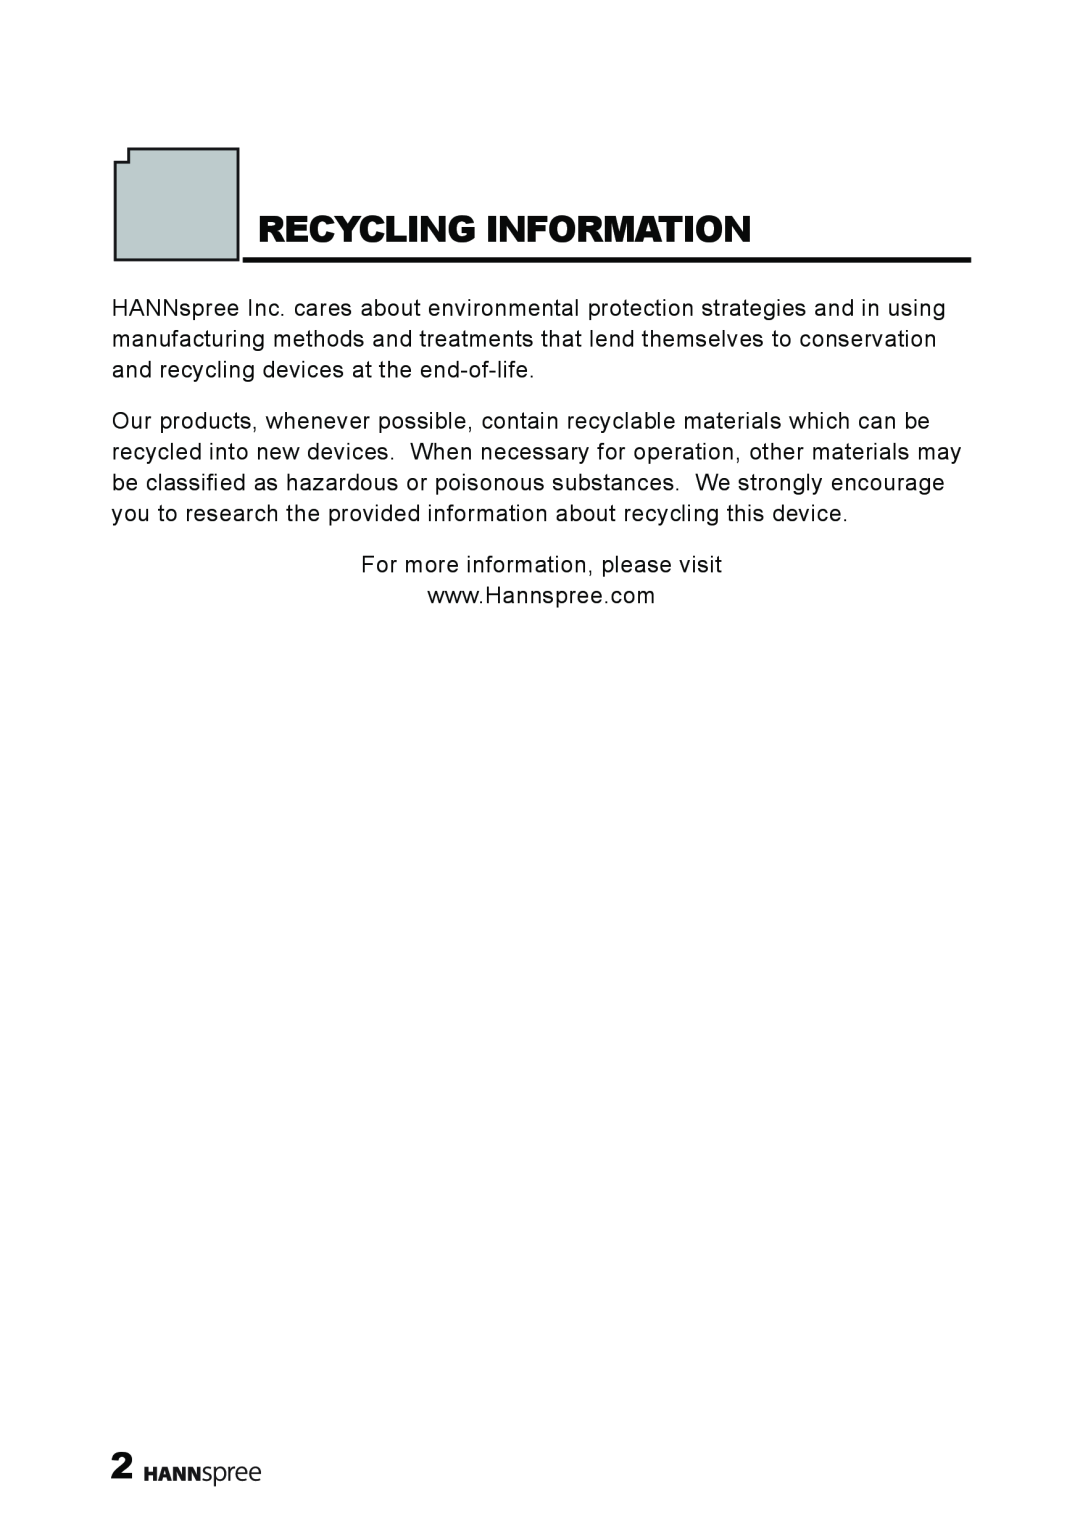 HANNspree XM manual Recycling Information 